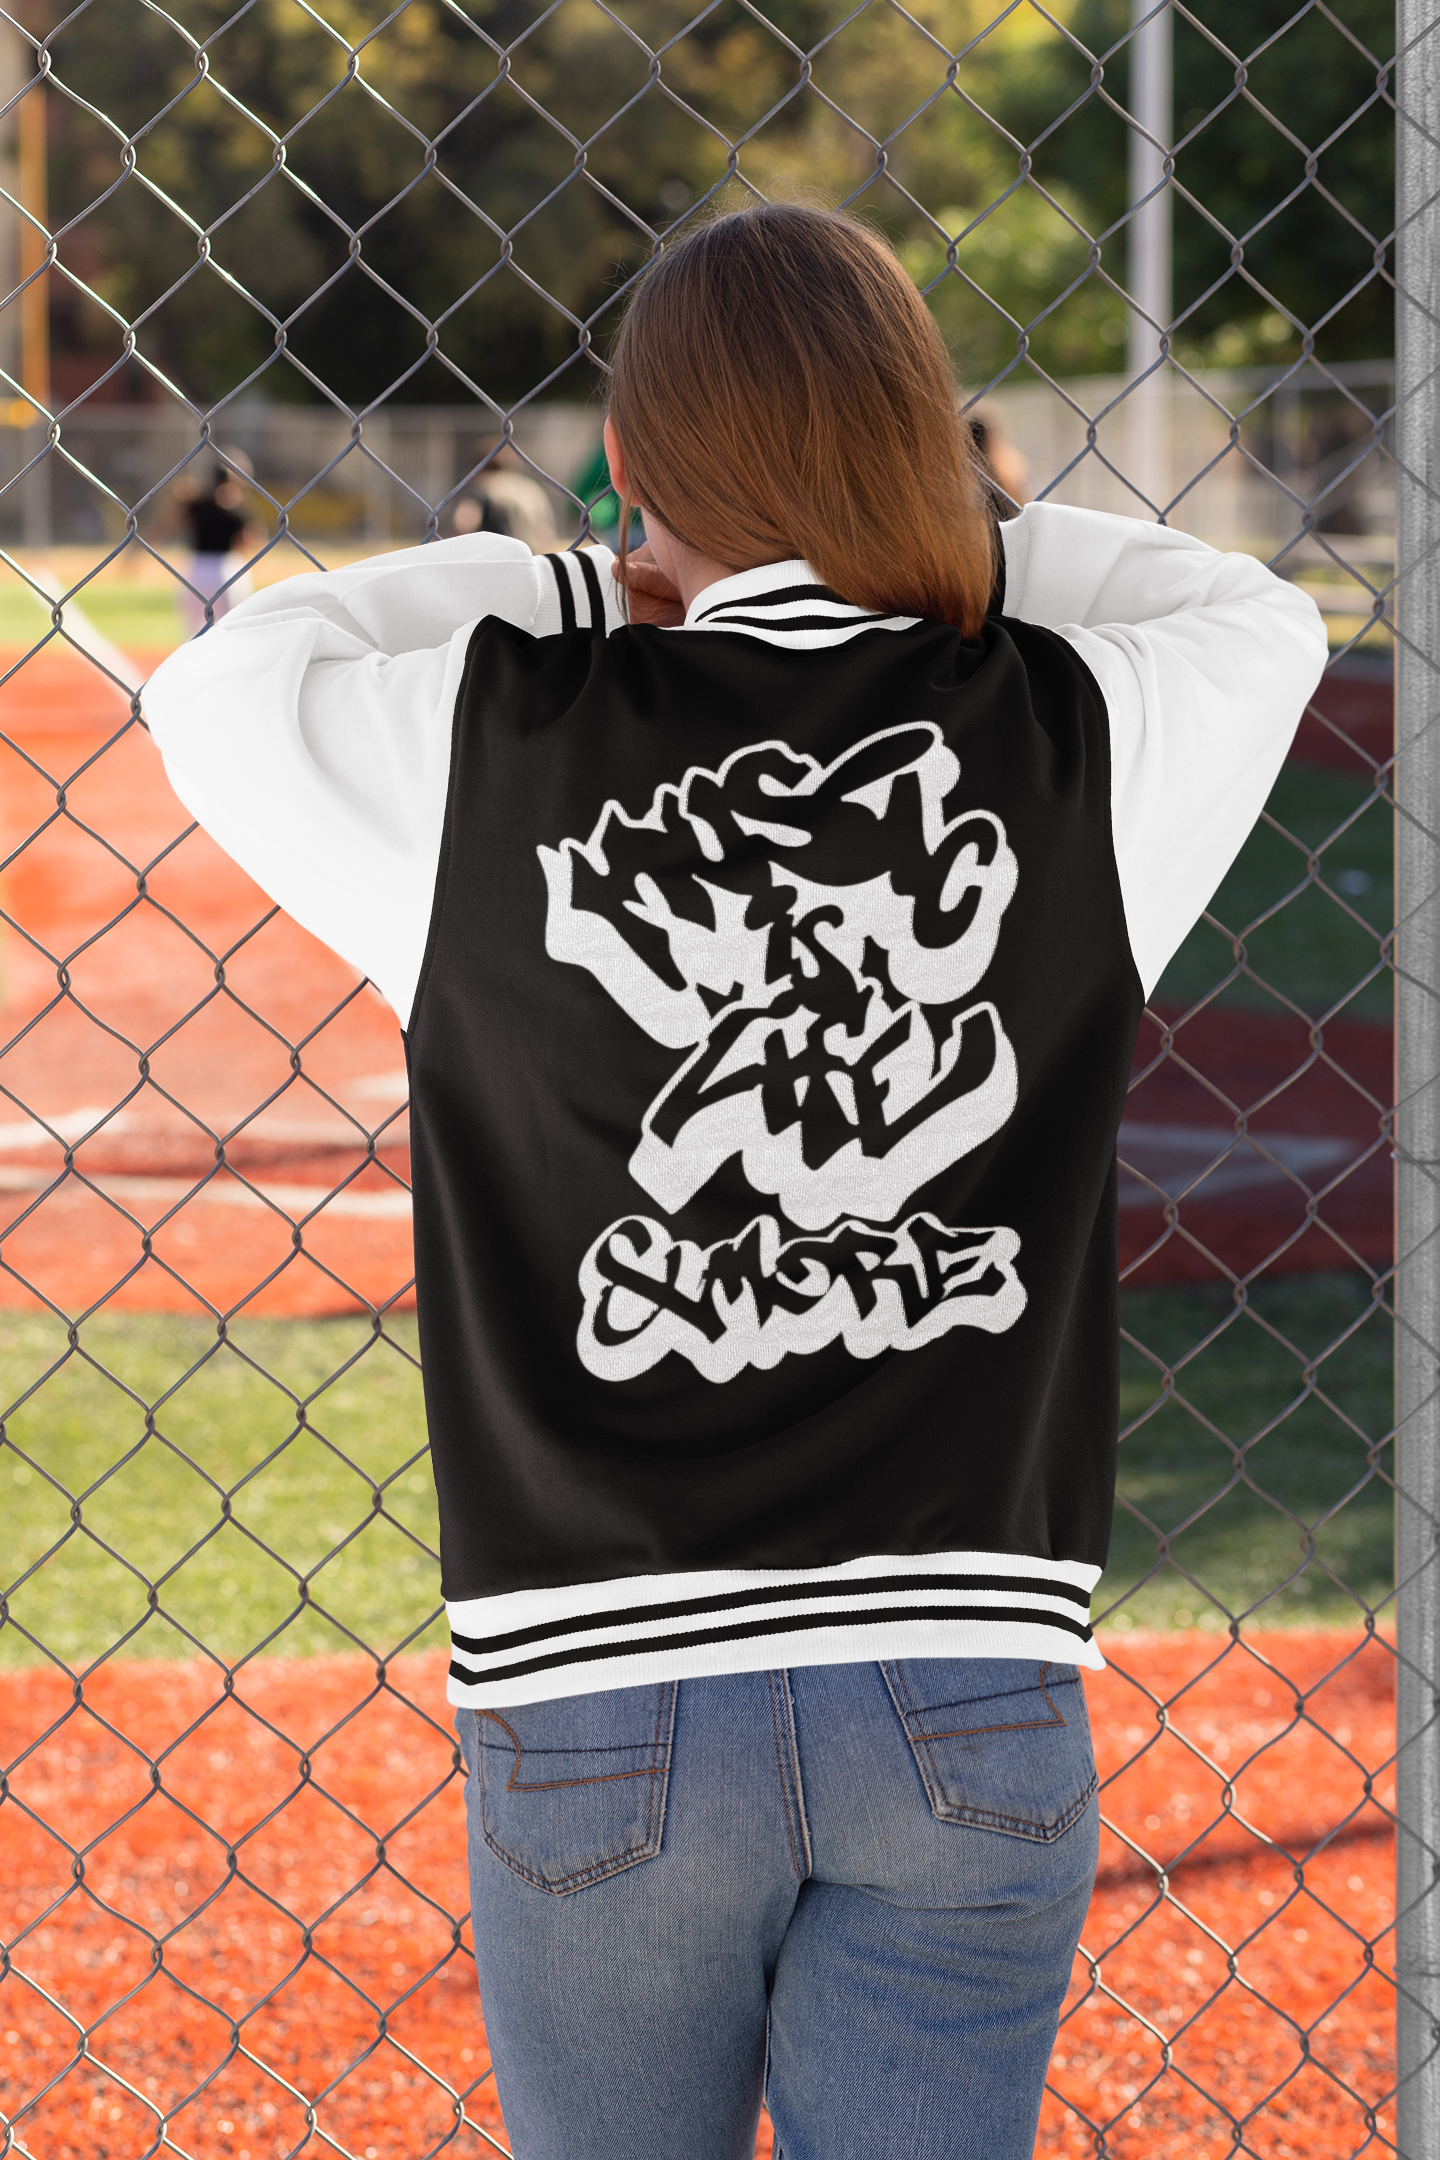 Wil NMore Official letterman jacket